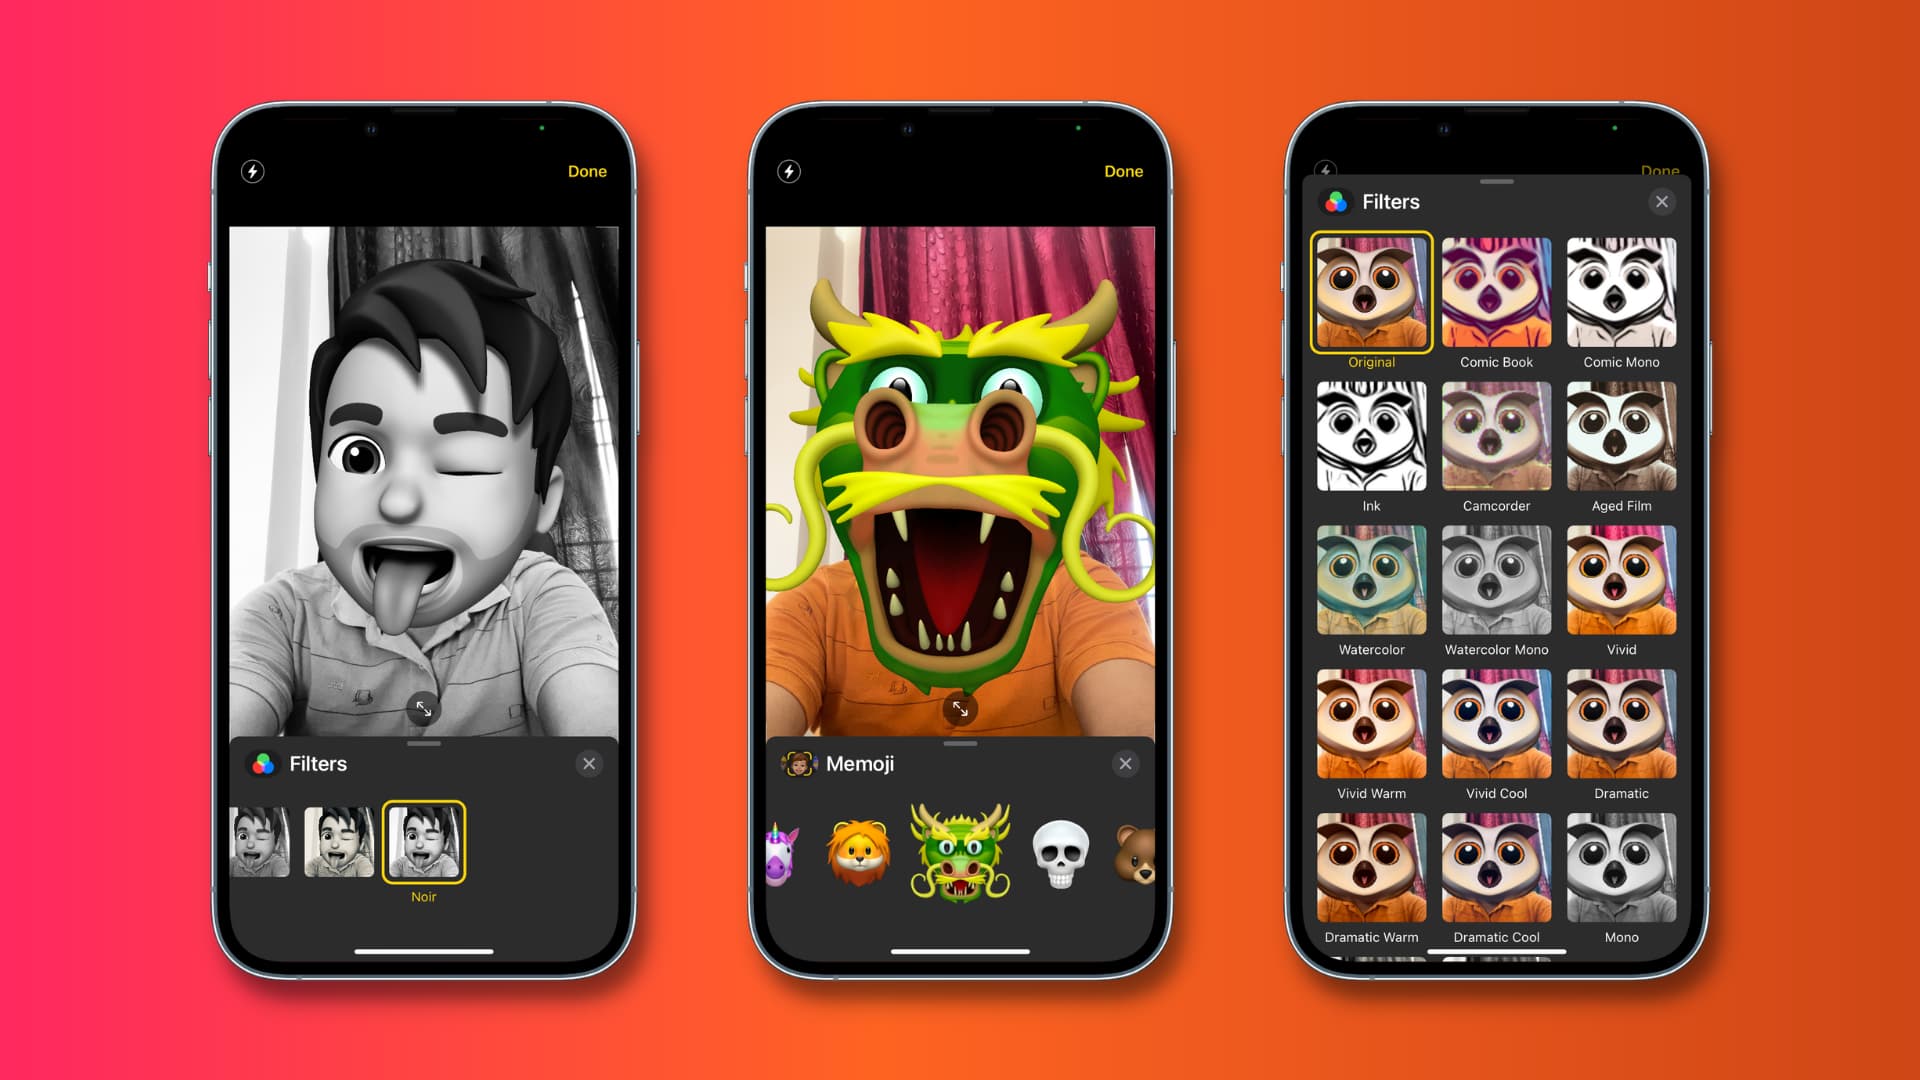 How to use Memoji, filters, shapes, and effects in iMessage camera